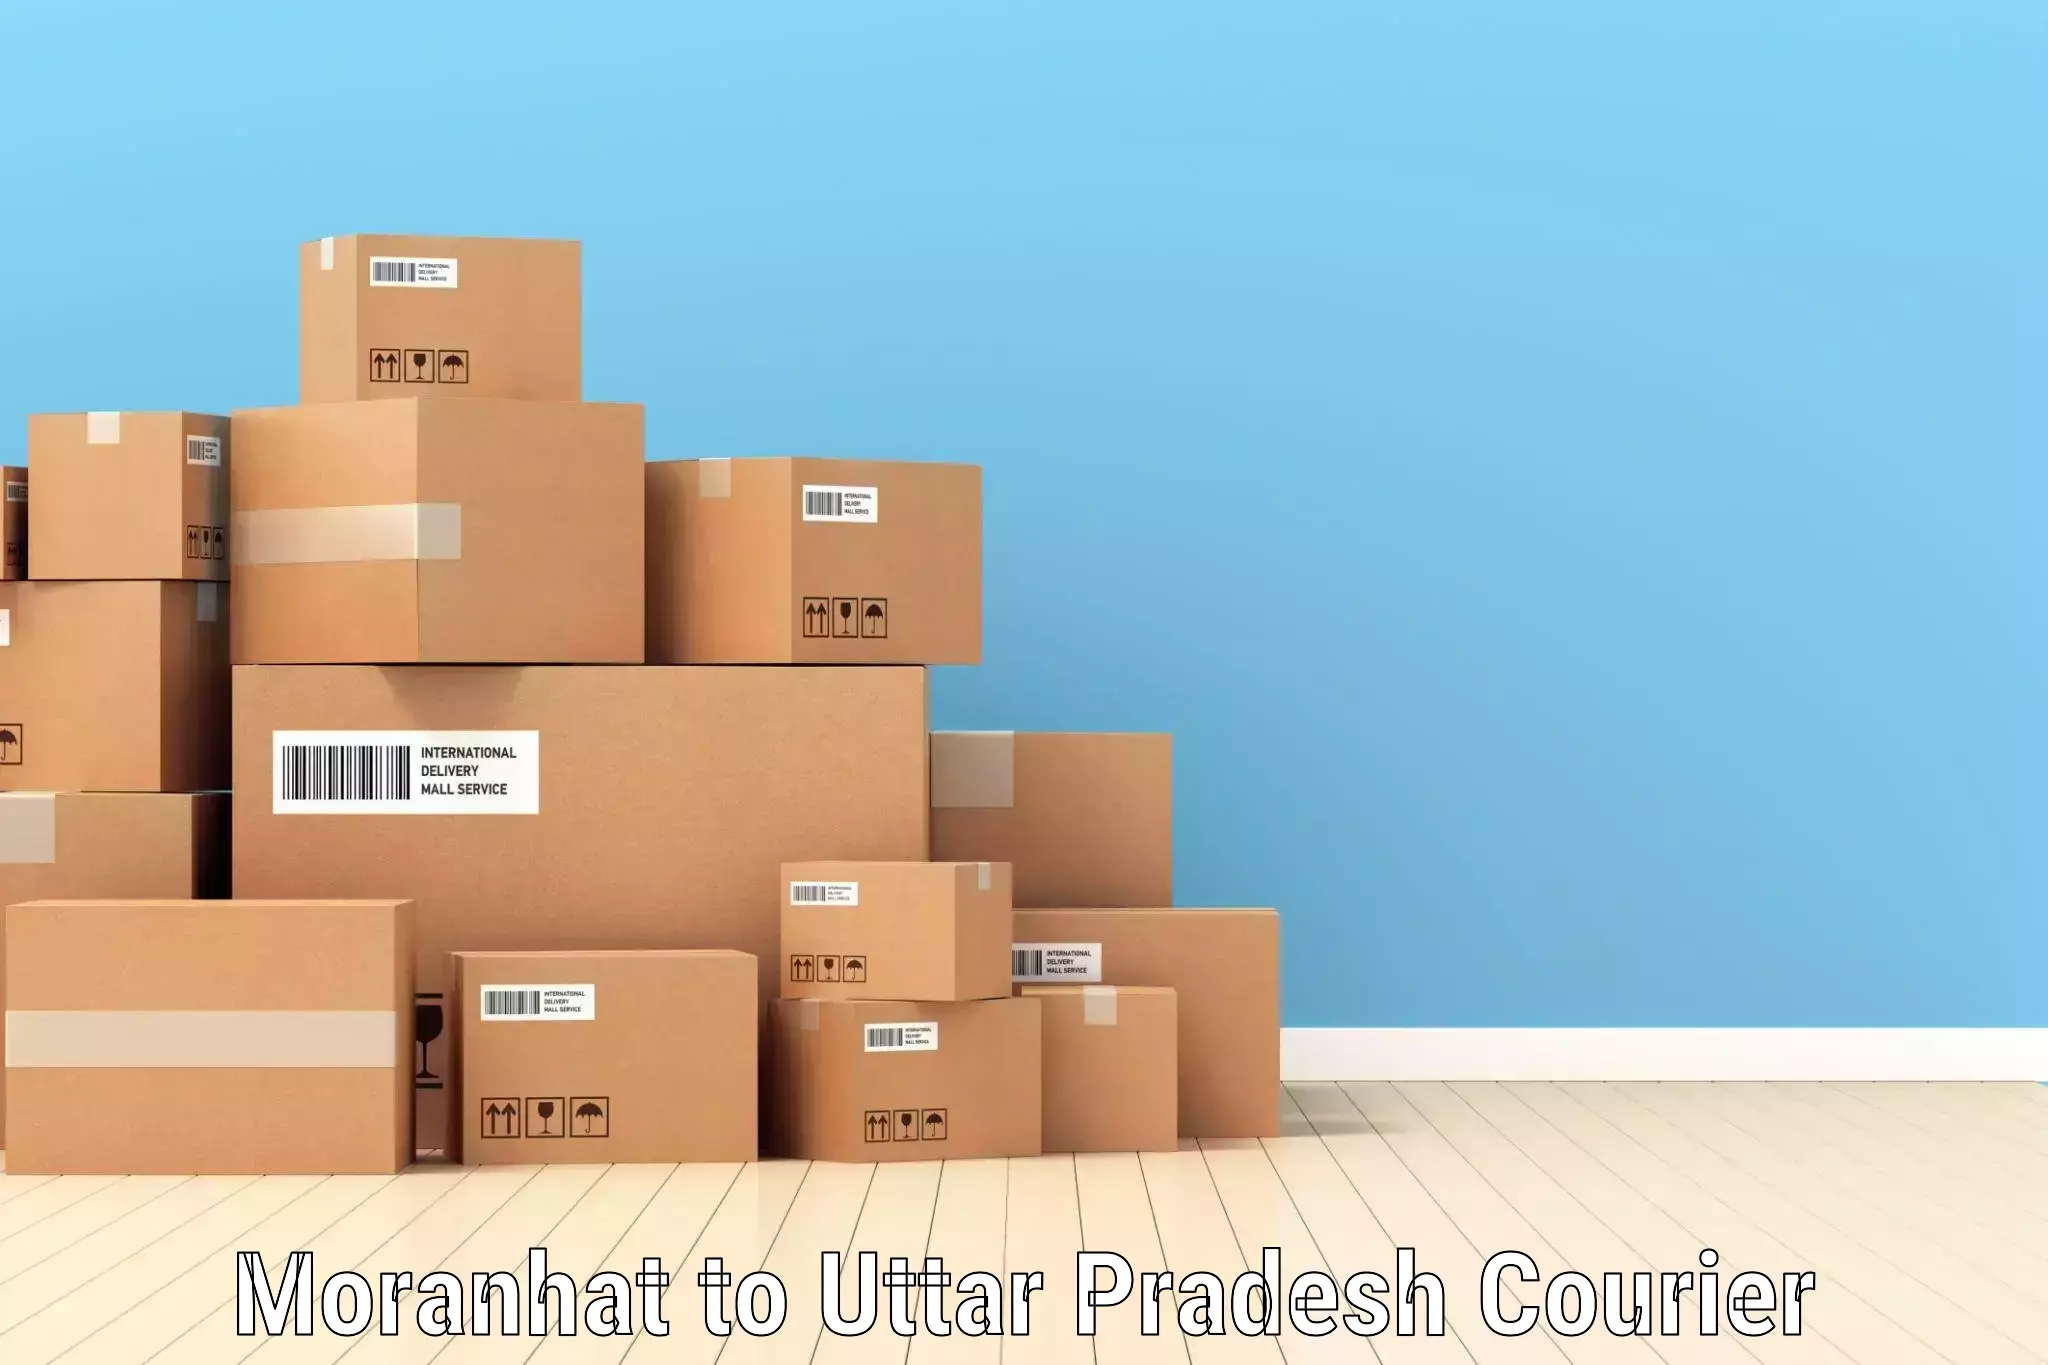 Online package tracking Moranhat to Dhaurahara